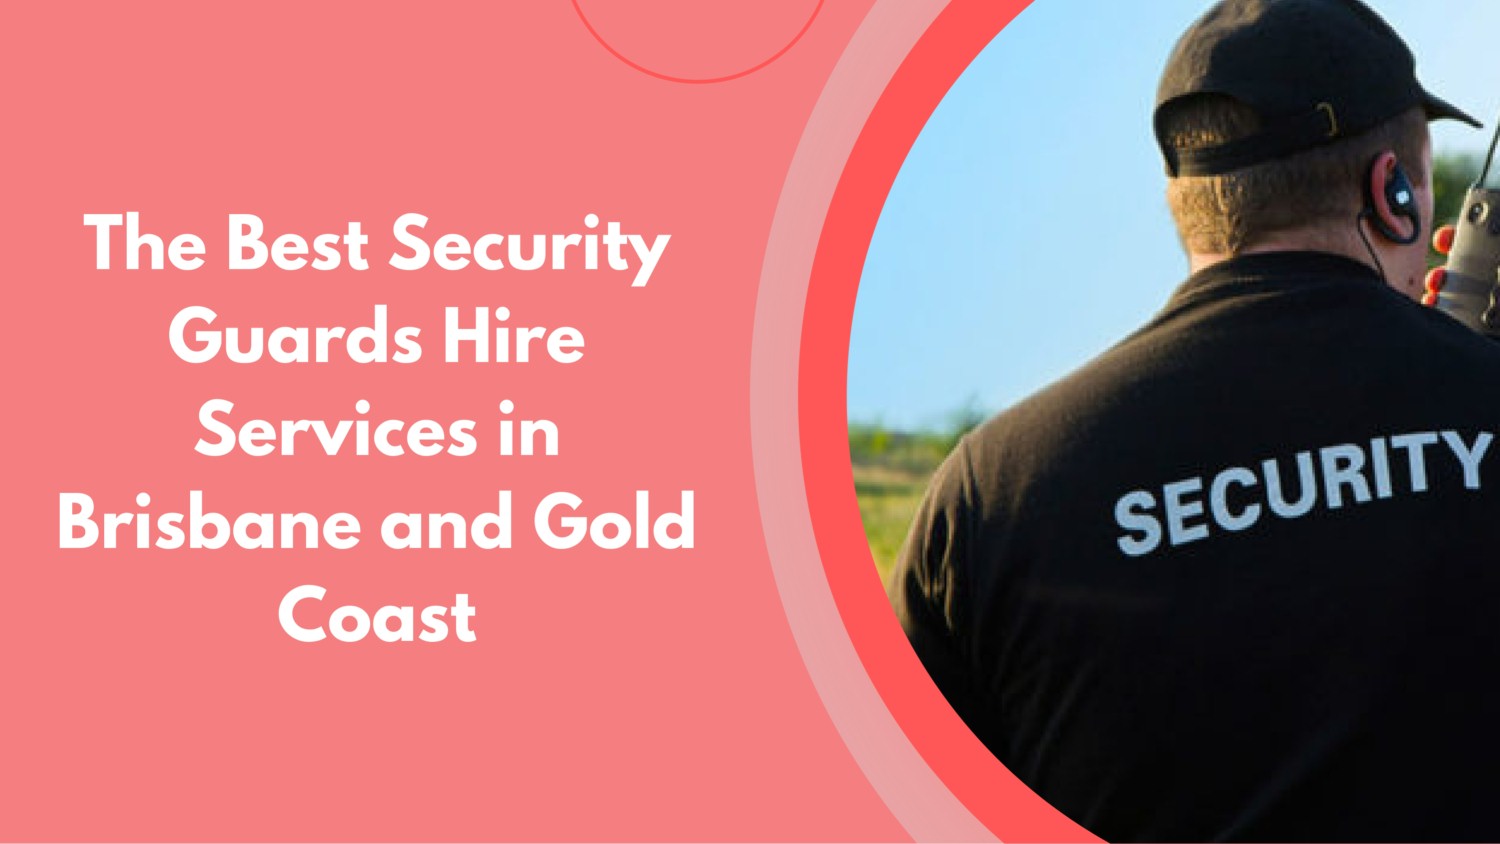 The Best Security Guards Hire Services in Brisbane and Gold Coast